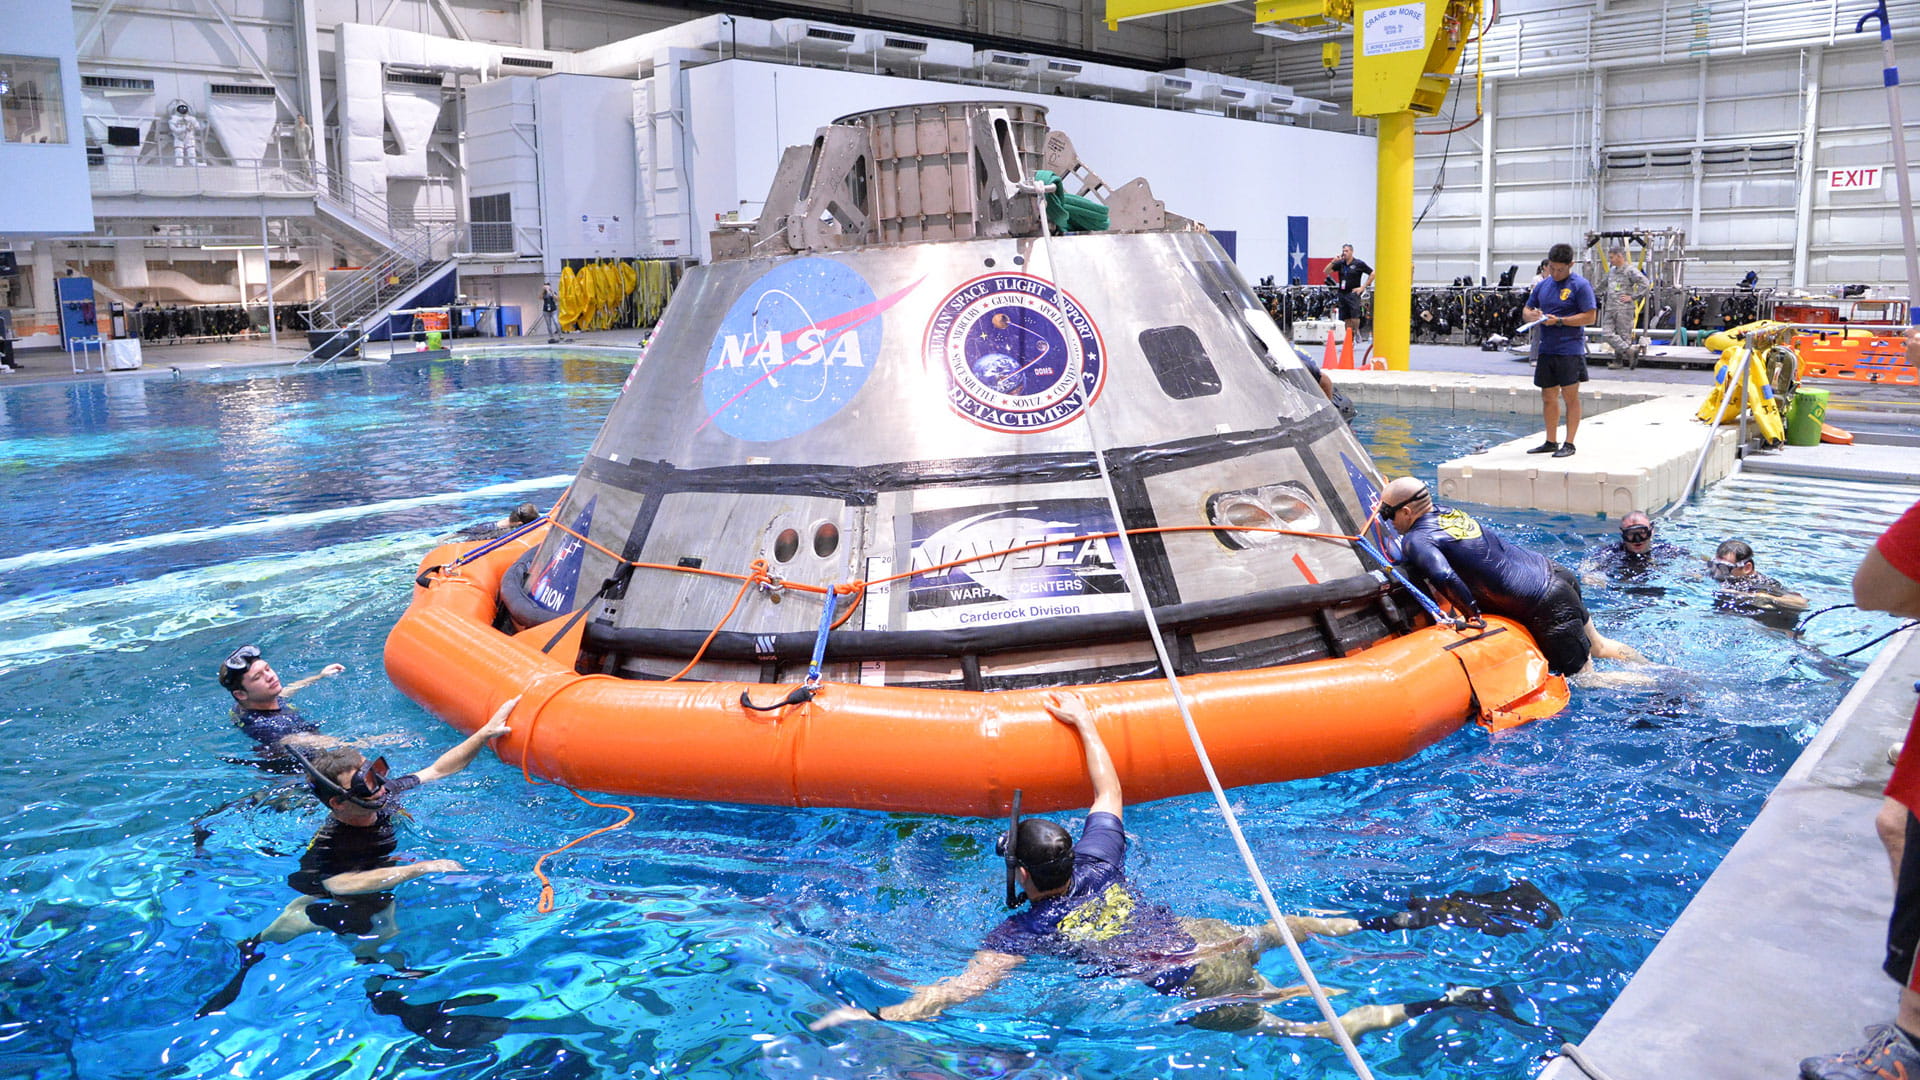 Men in scuba gear surrounding a space capsule in a testing facility's pool